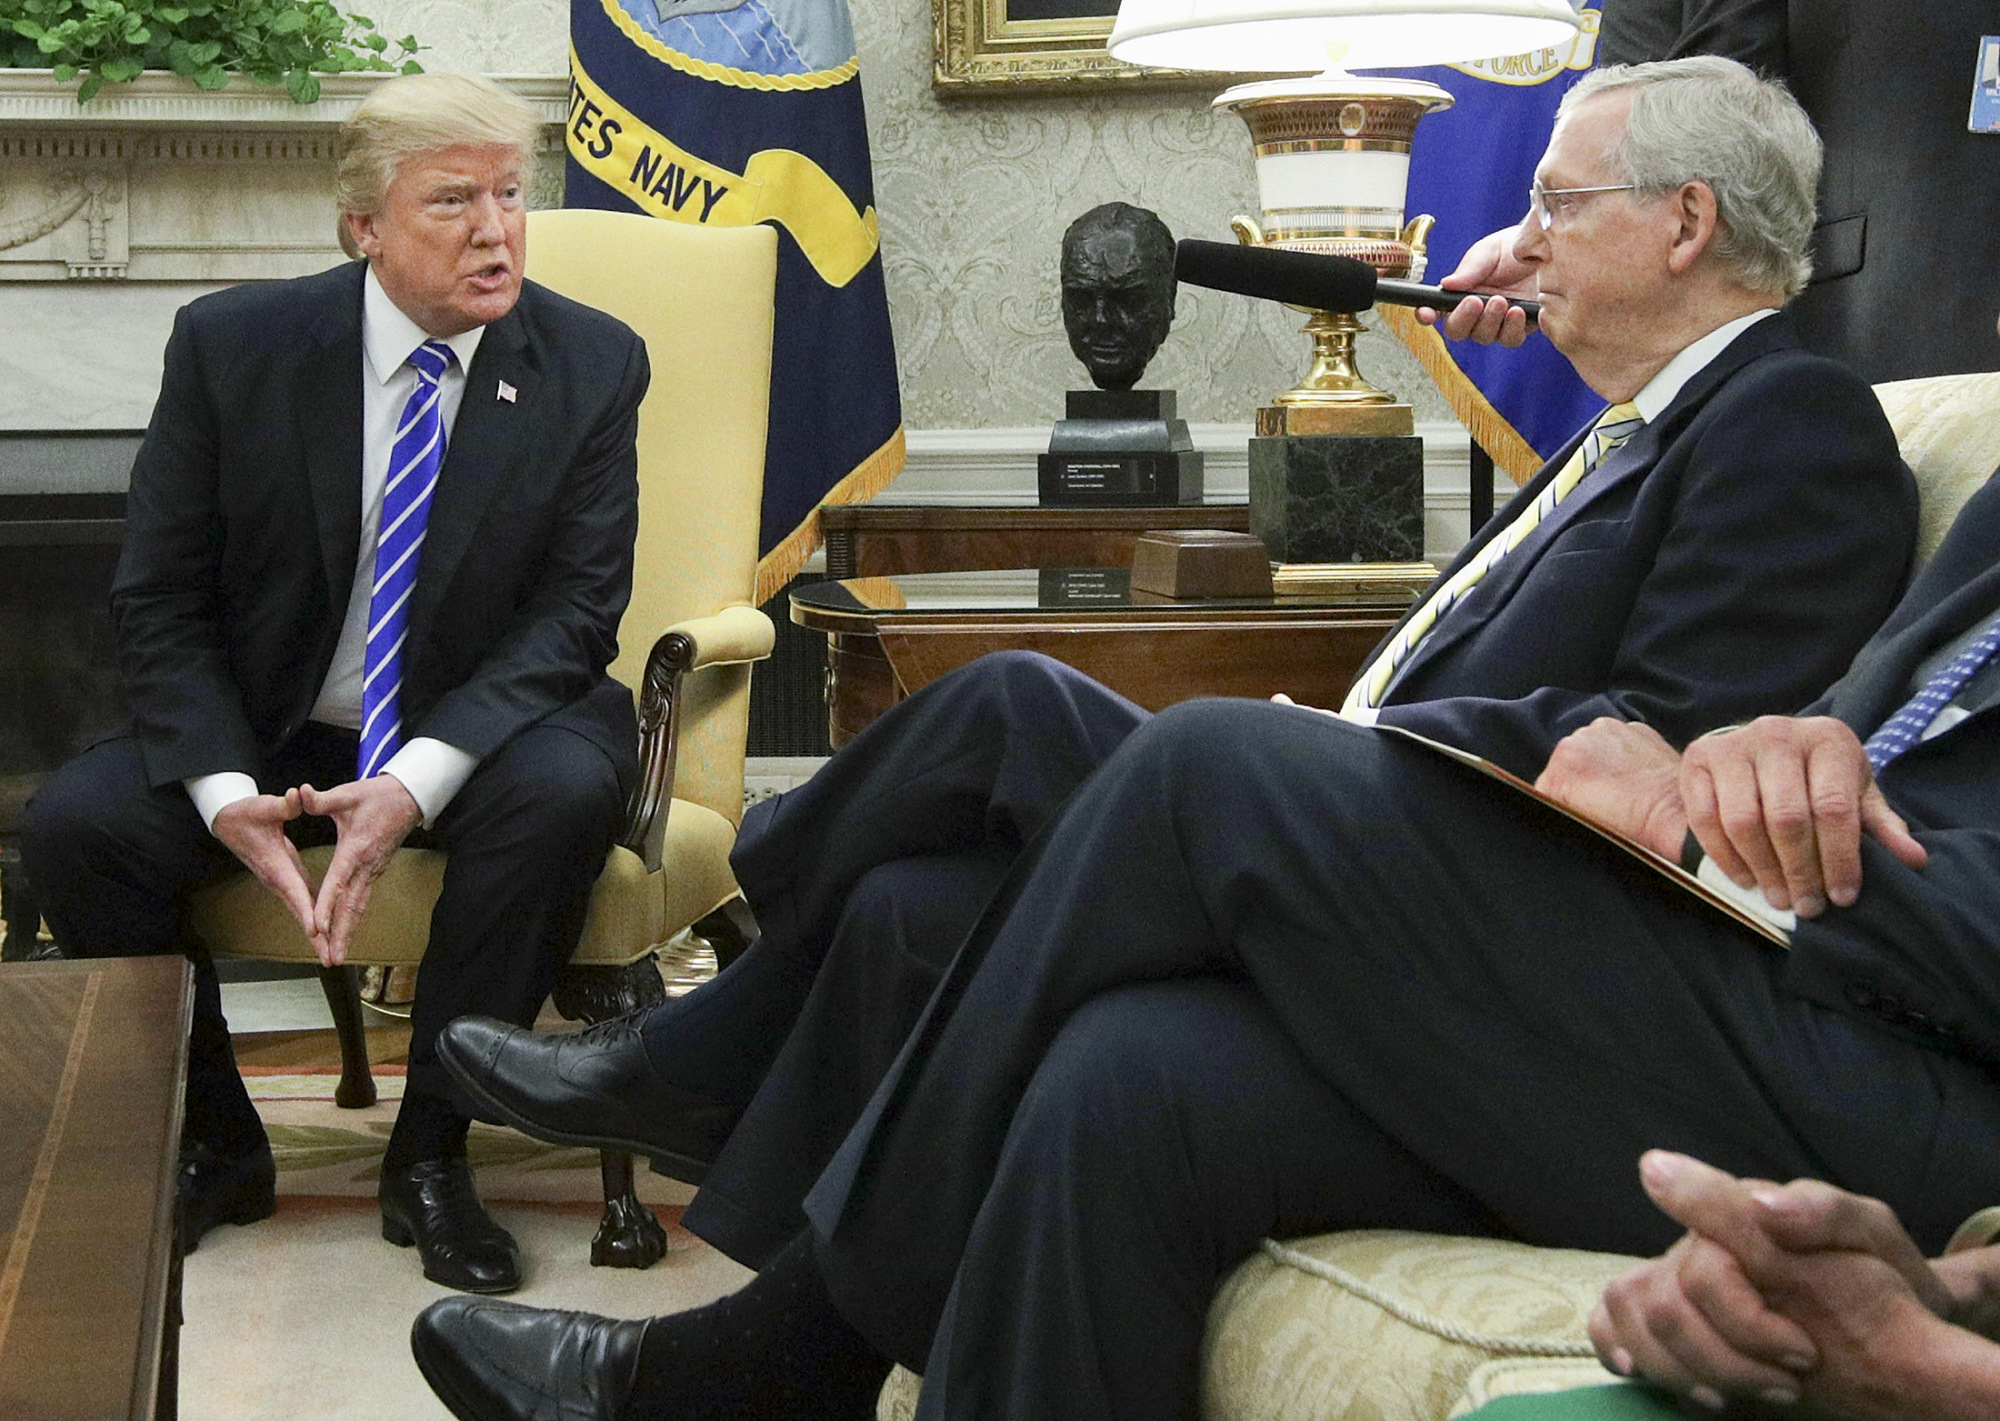 Donald Trump speaks to Mitch McConnell during a meeting in the Oval Office in Washington, D.C., on Sept. 6, 2017.
